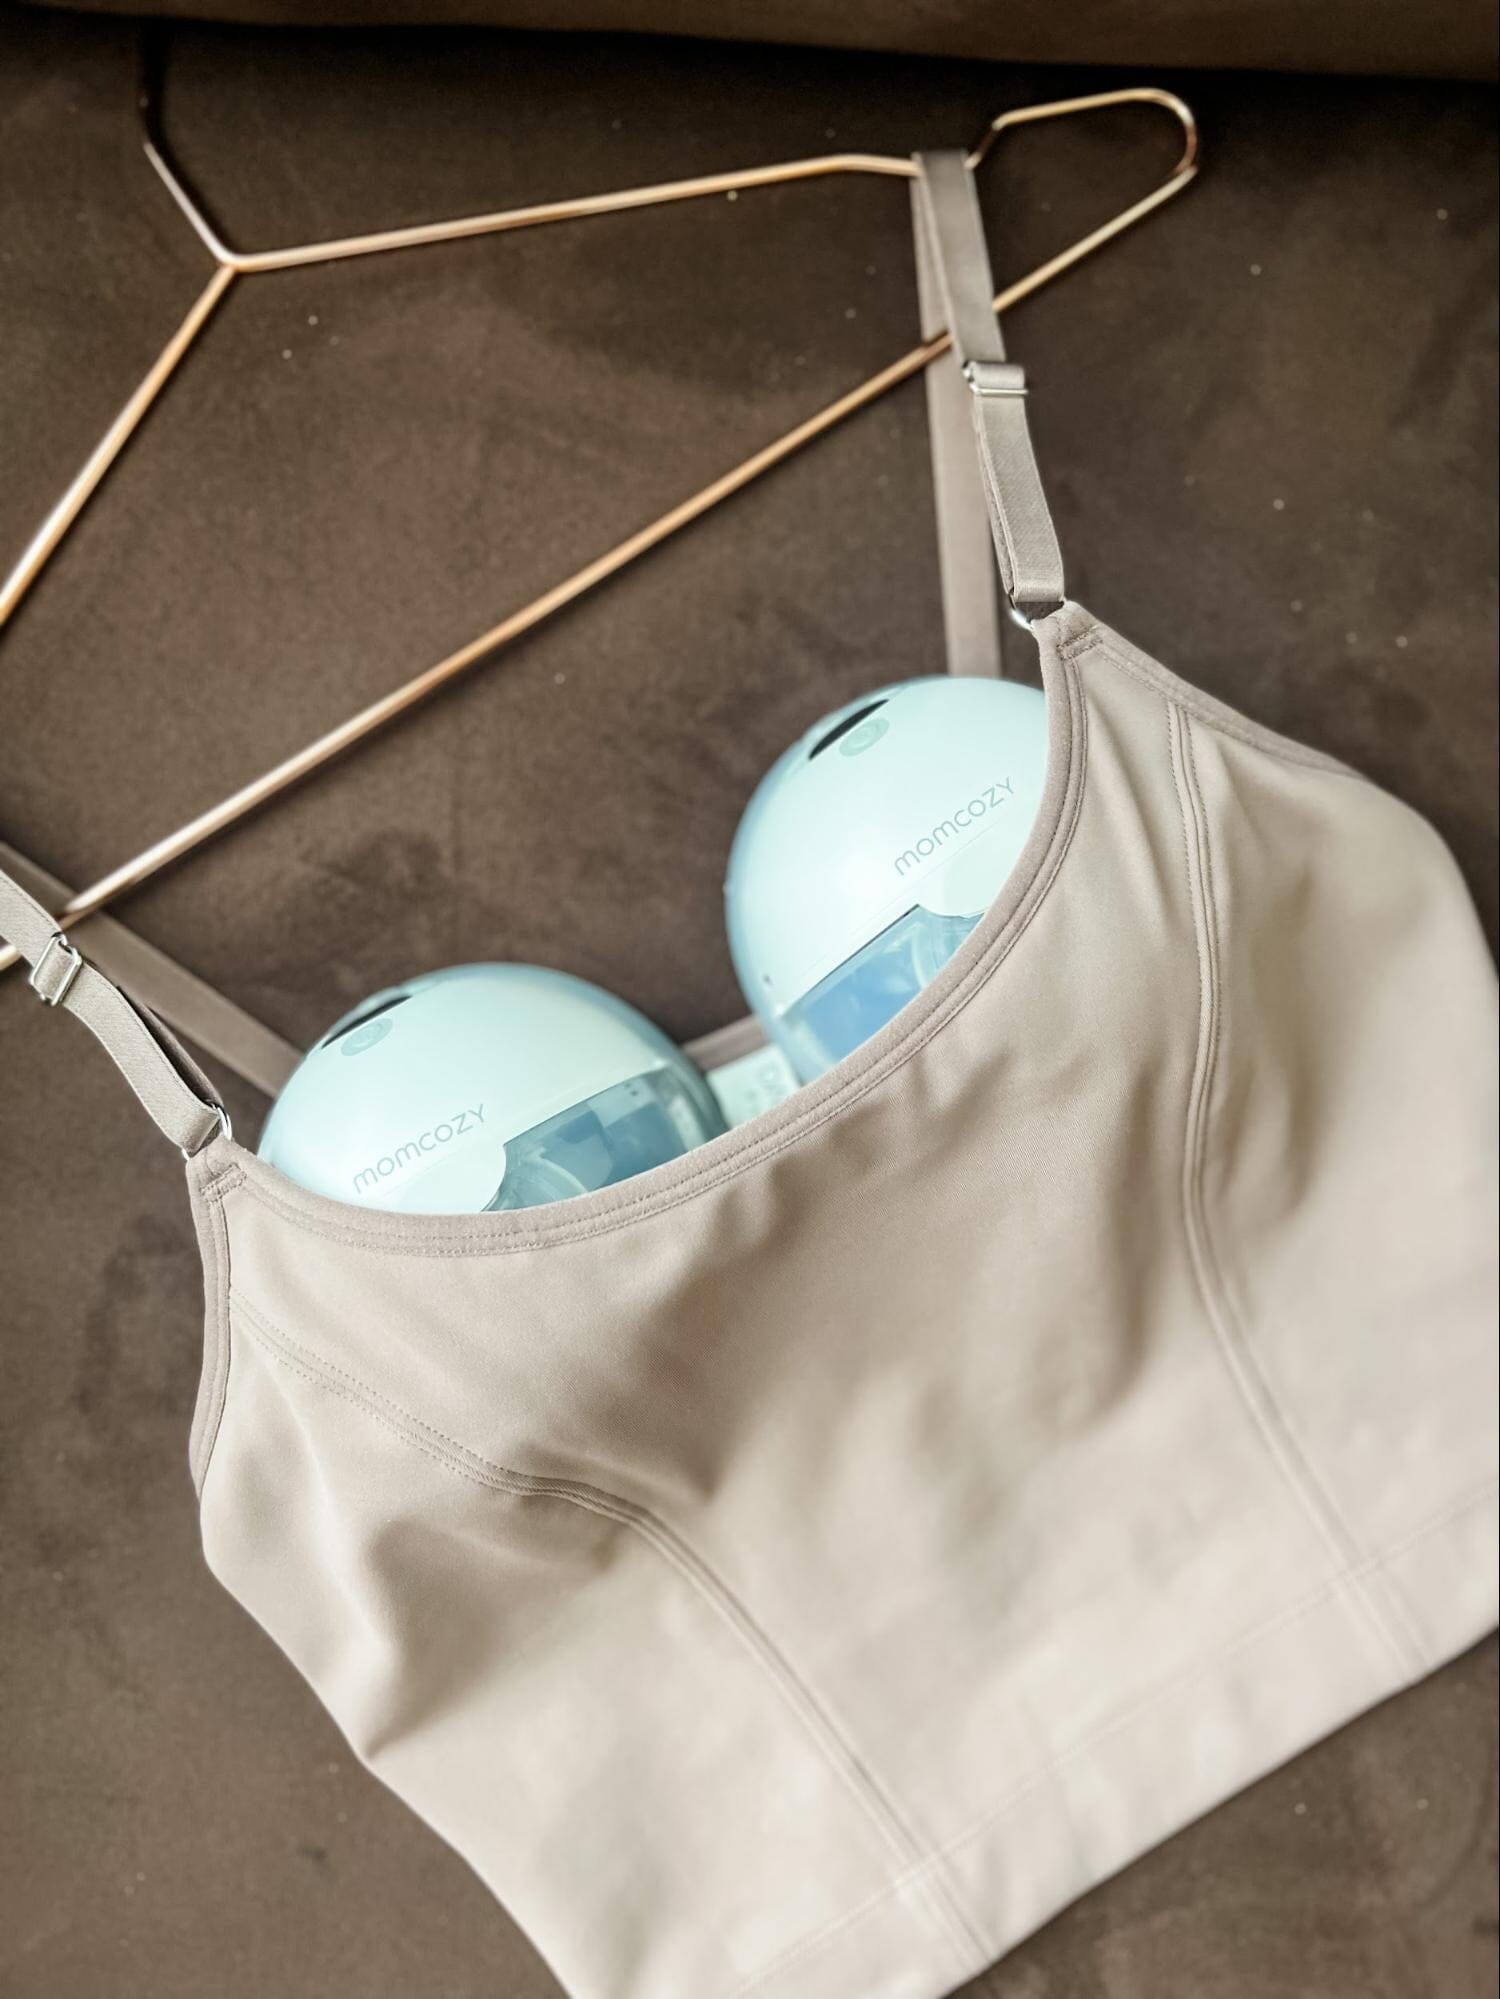 Momcozy M5 Wearable Breast Pump Review: The Perfect Pumping Option